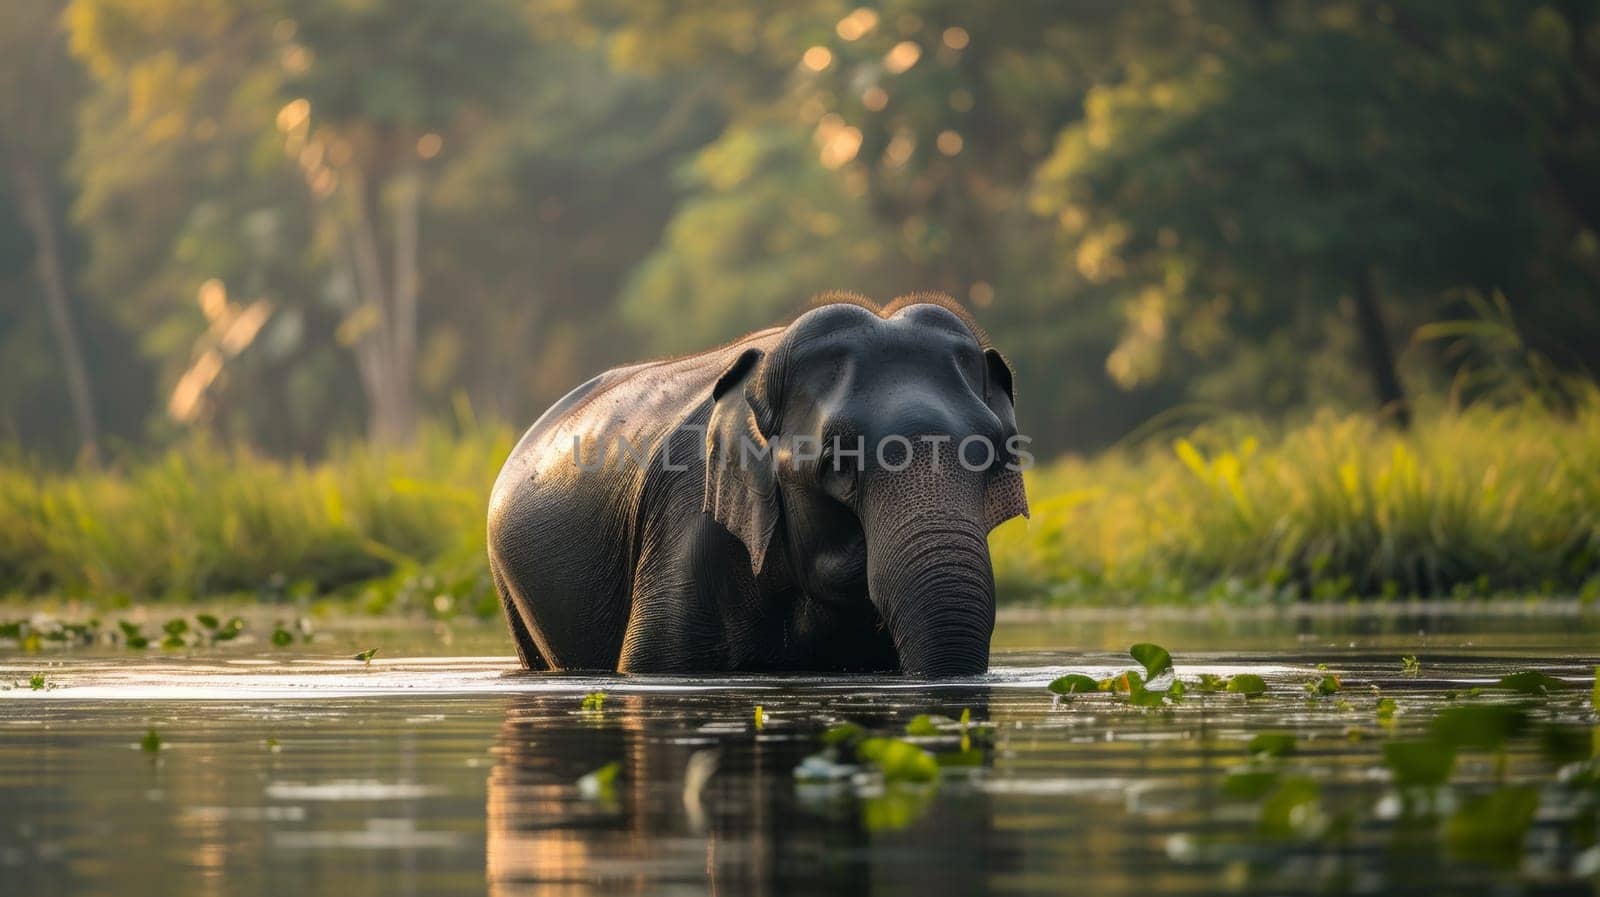 An elephant is walking in the water with grass and trees behind it, AI by starush